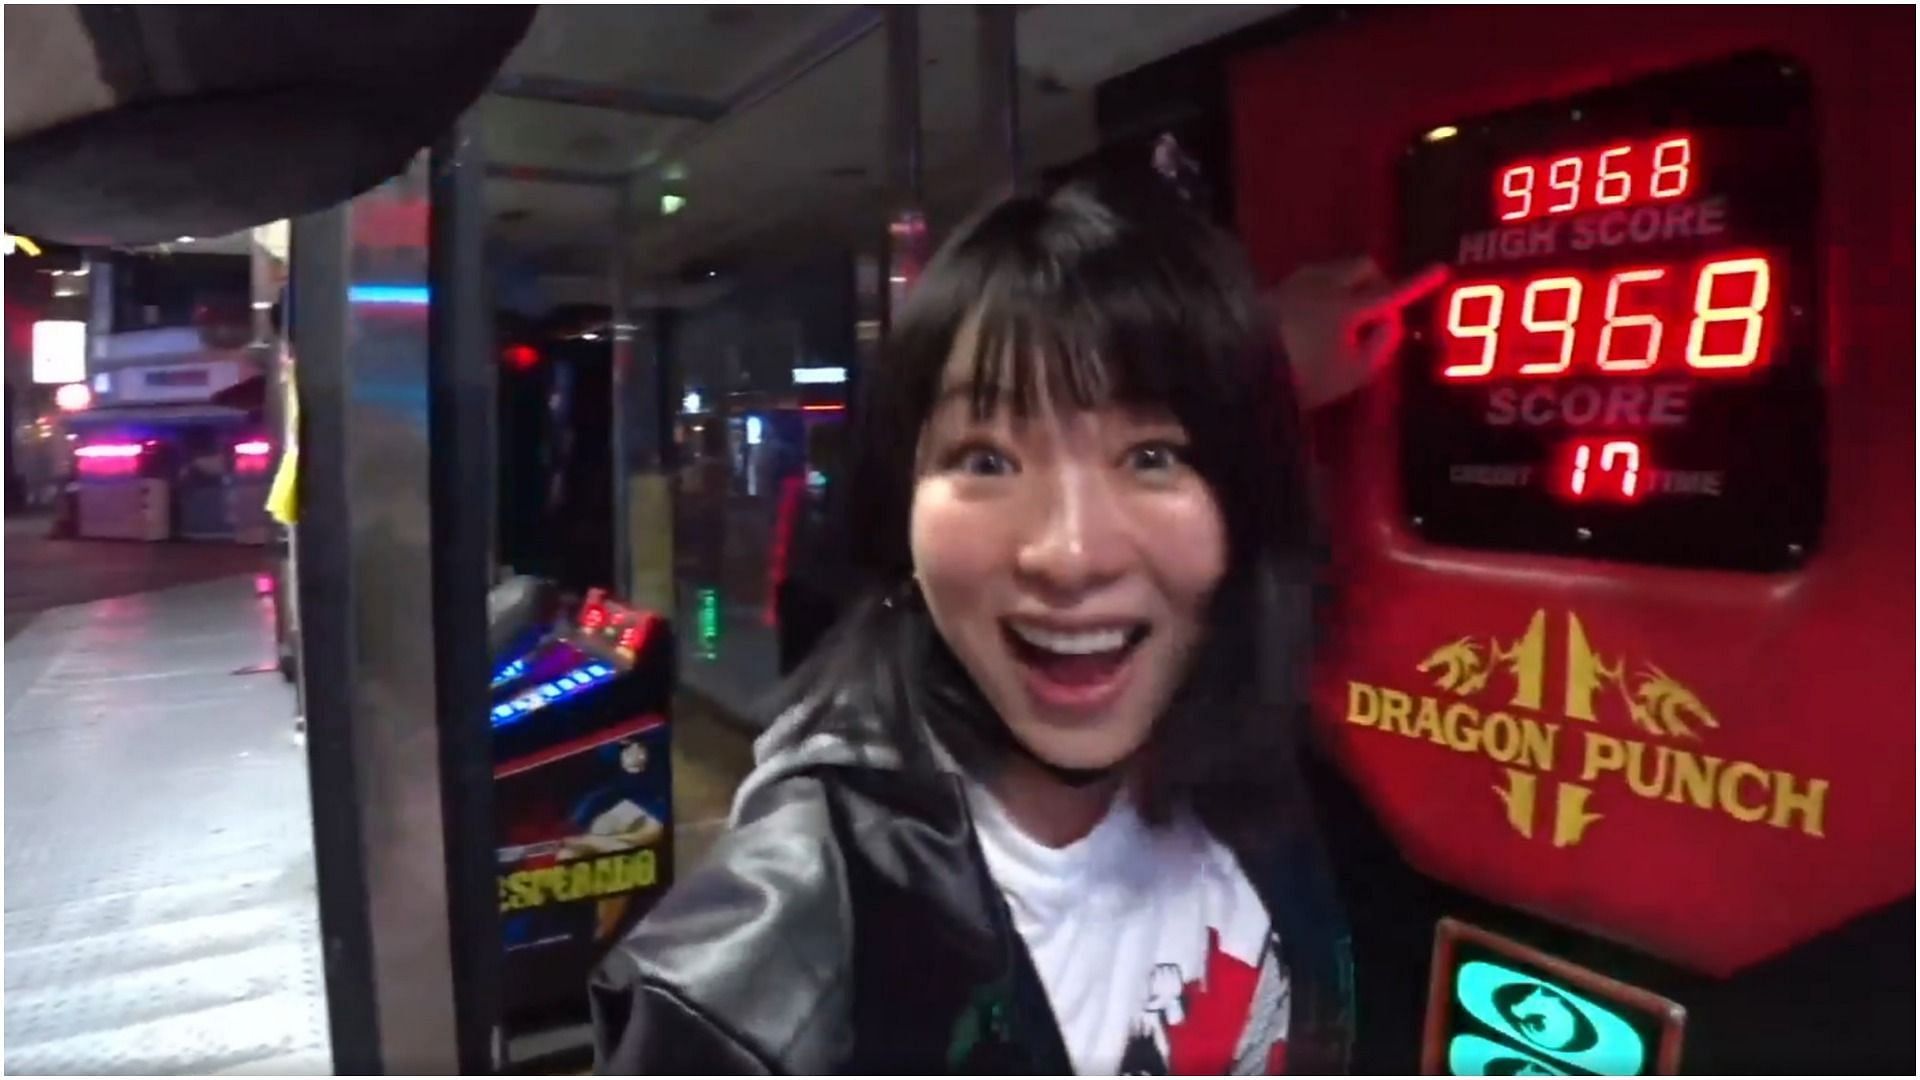 Heosu used her Busan Demon power to break the high score on the punching bag arcade game (Image via Twitch)